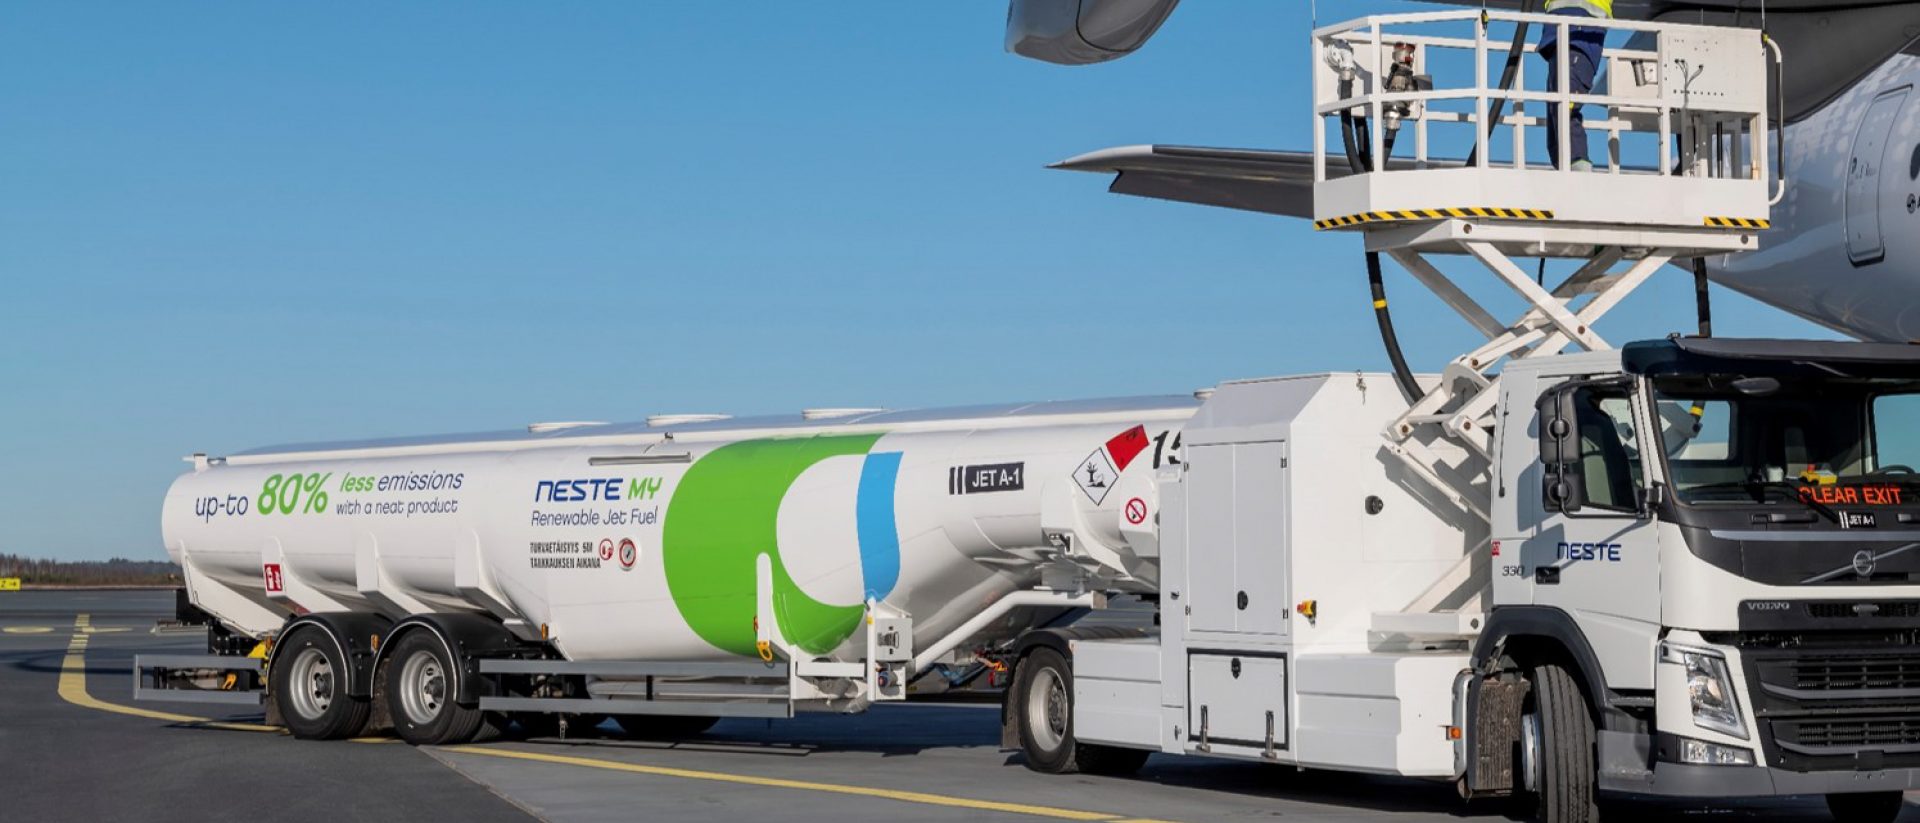 Sustainable Aviation Fuel – tunker truck at airport